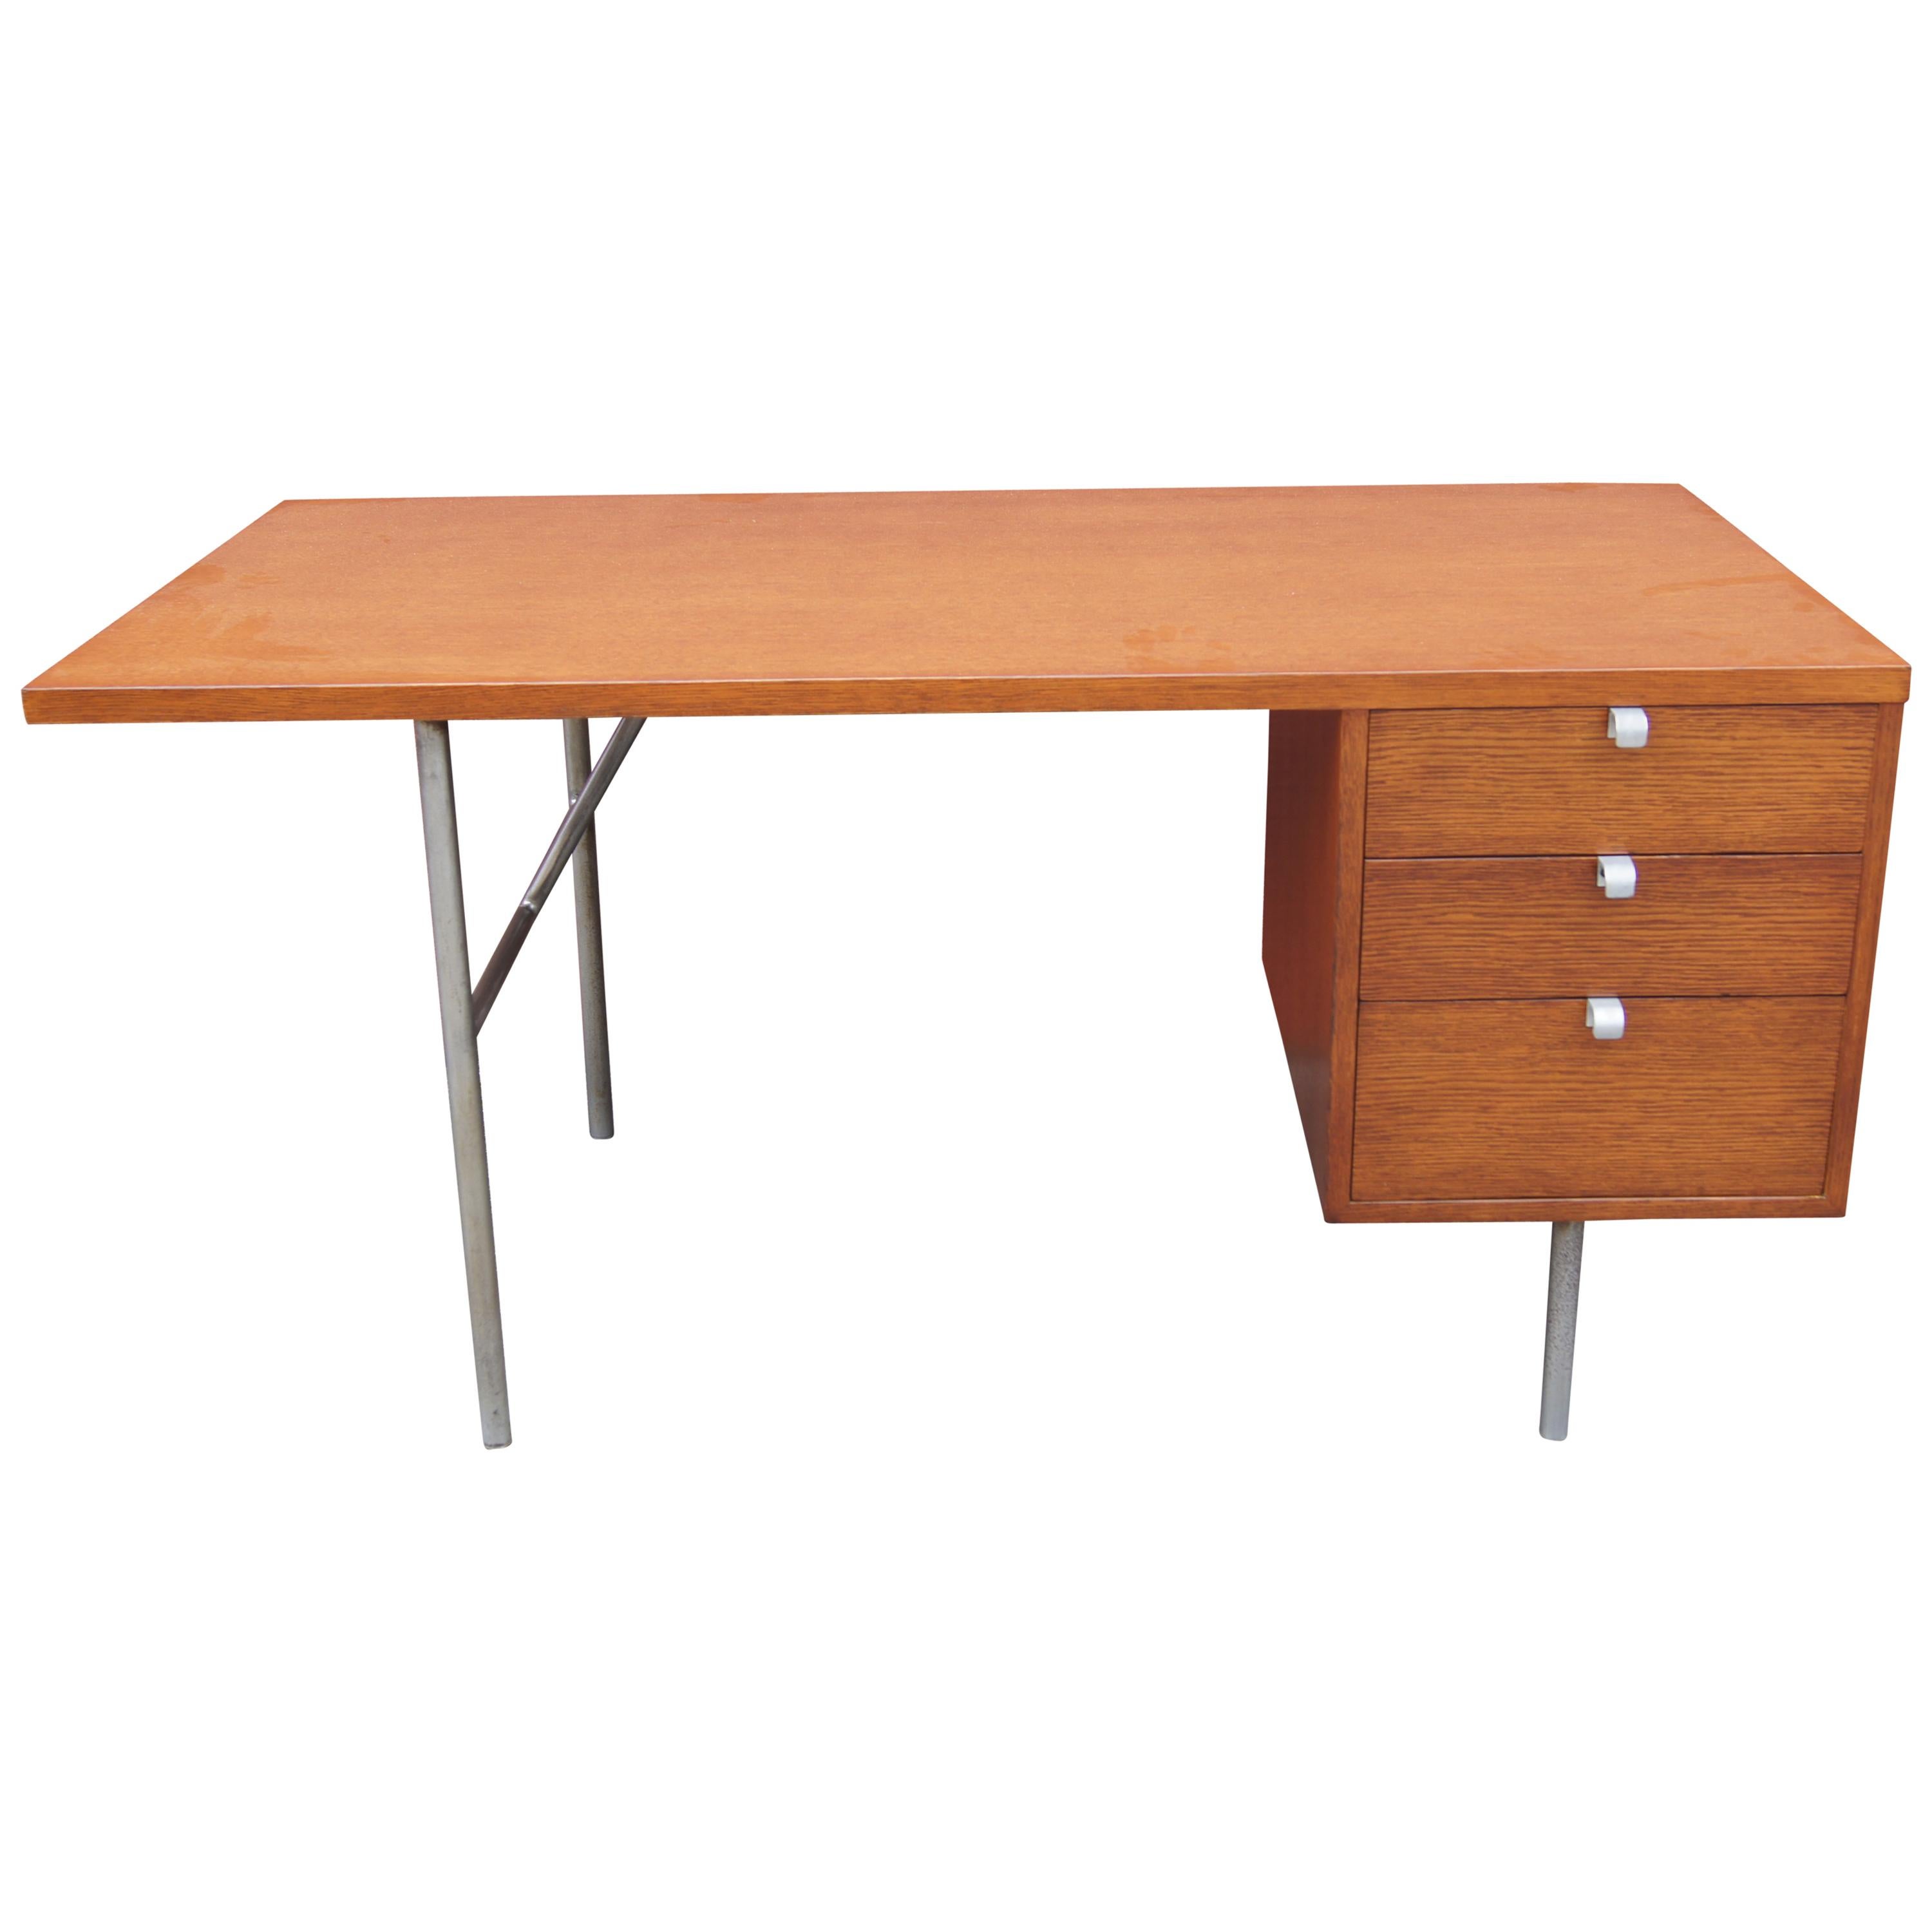 Mahogany and Steel Desk by George Nelson for Herman Miller